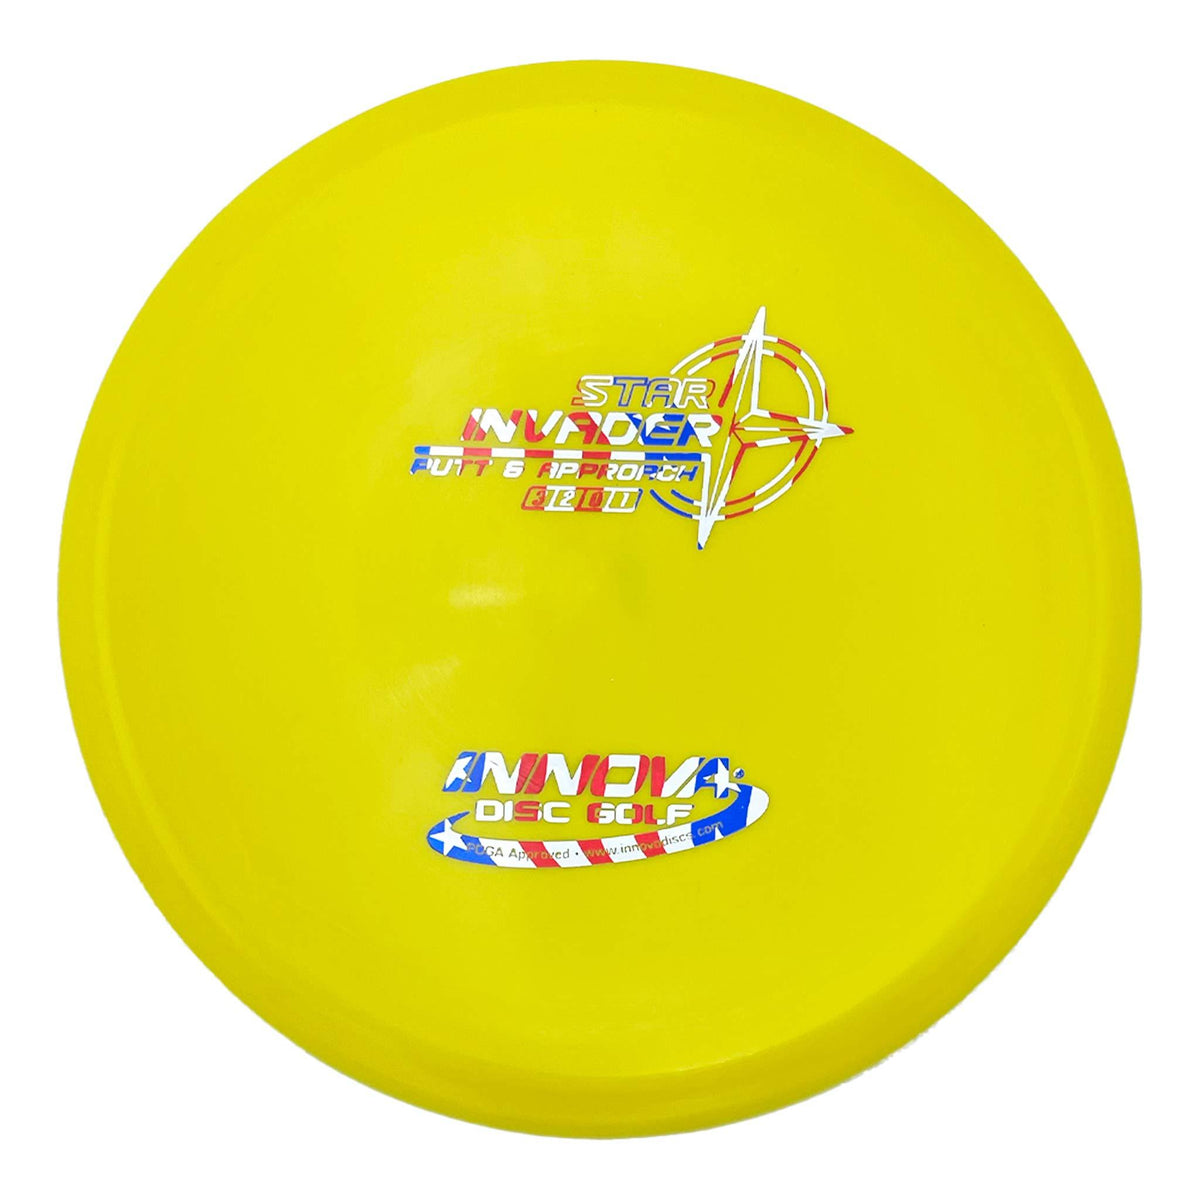 Innova Disc Golf Star Invader putter and approach - Yellow